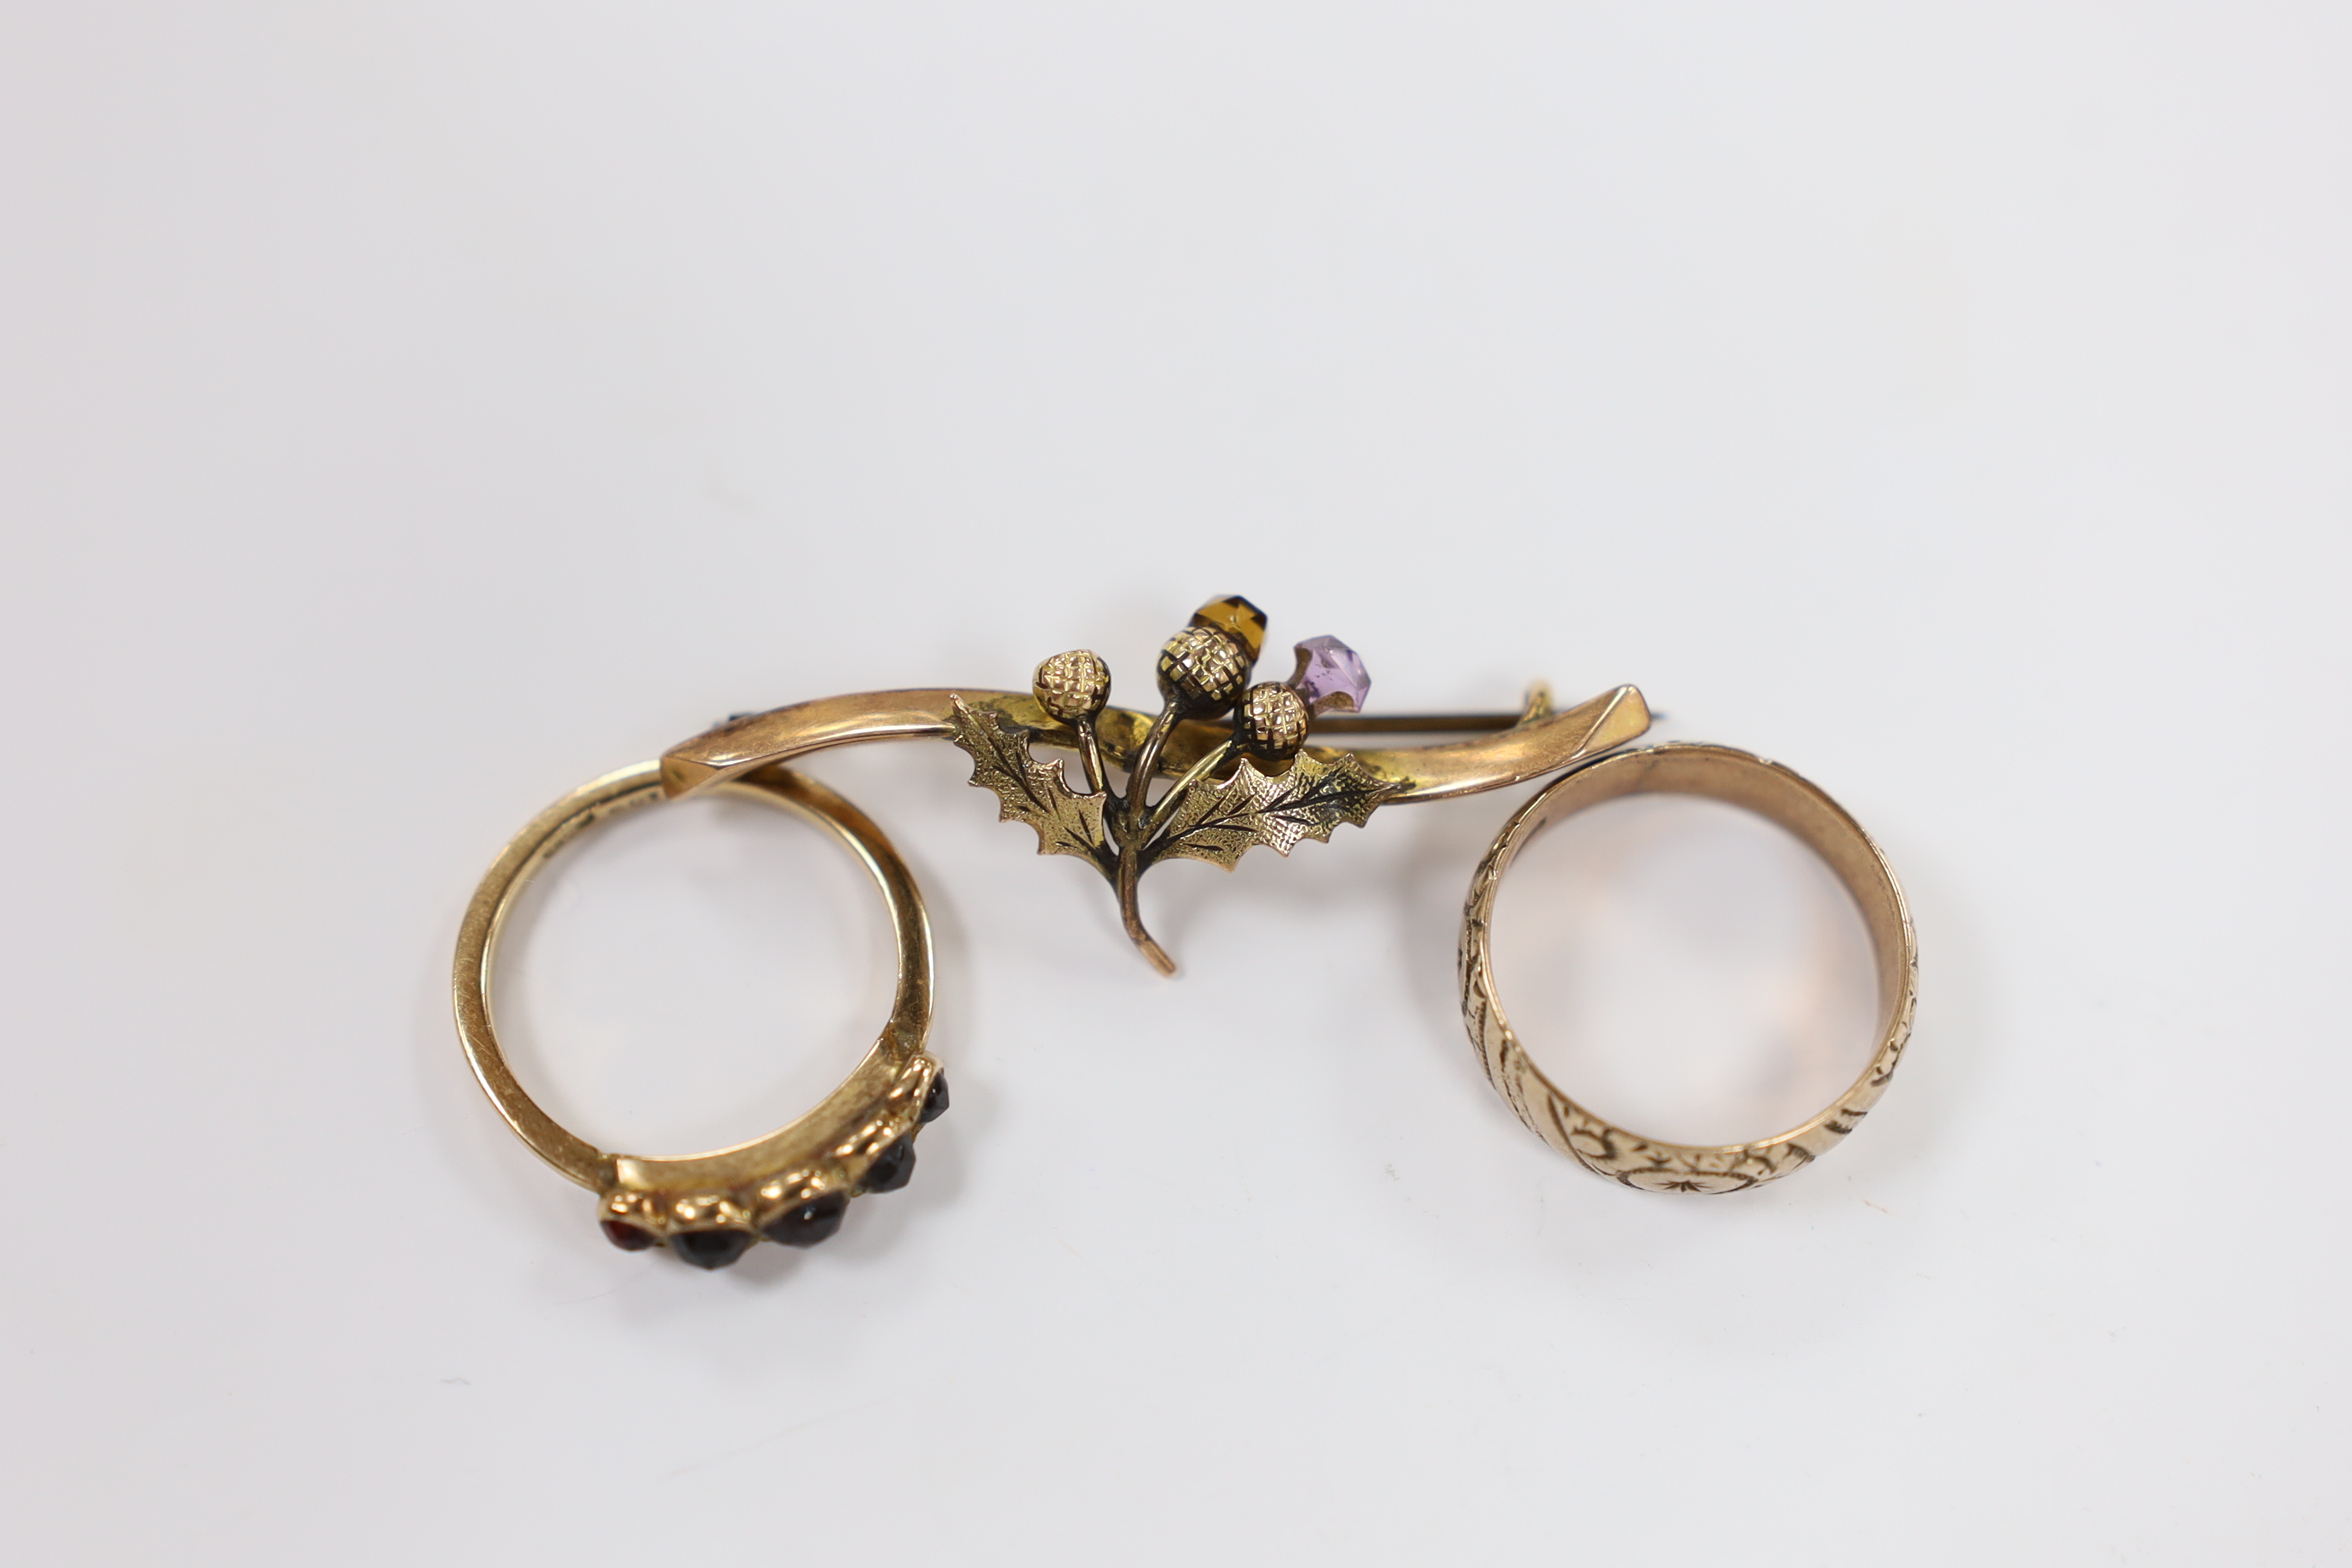 A 9ct and graduated five stone facetted garnet set ring, an engraved 9ct gold band and a 9ct gold and gem set bar brooch (stone missing), gross weight 8.5 grams.